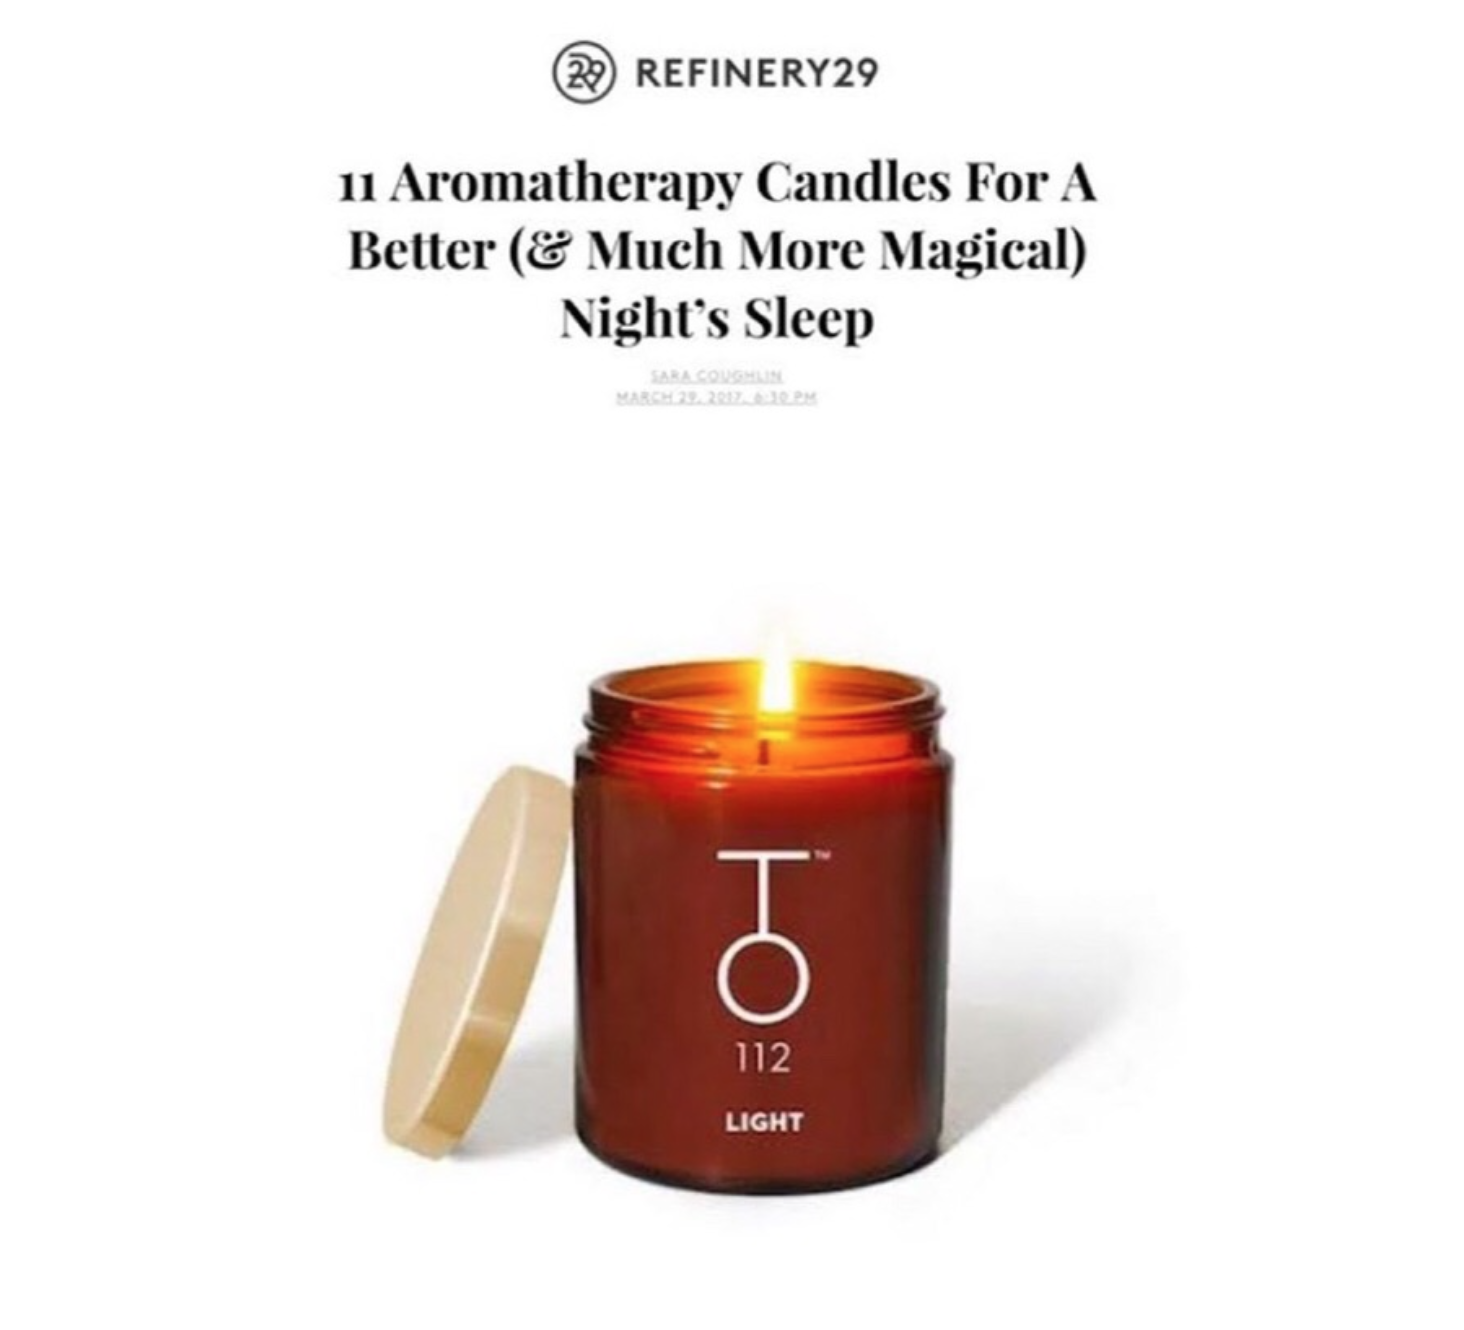 TO112 Palo Santo Aromatherapy candle Refinery 29 article